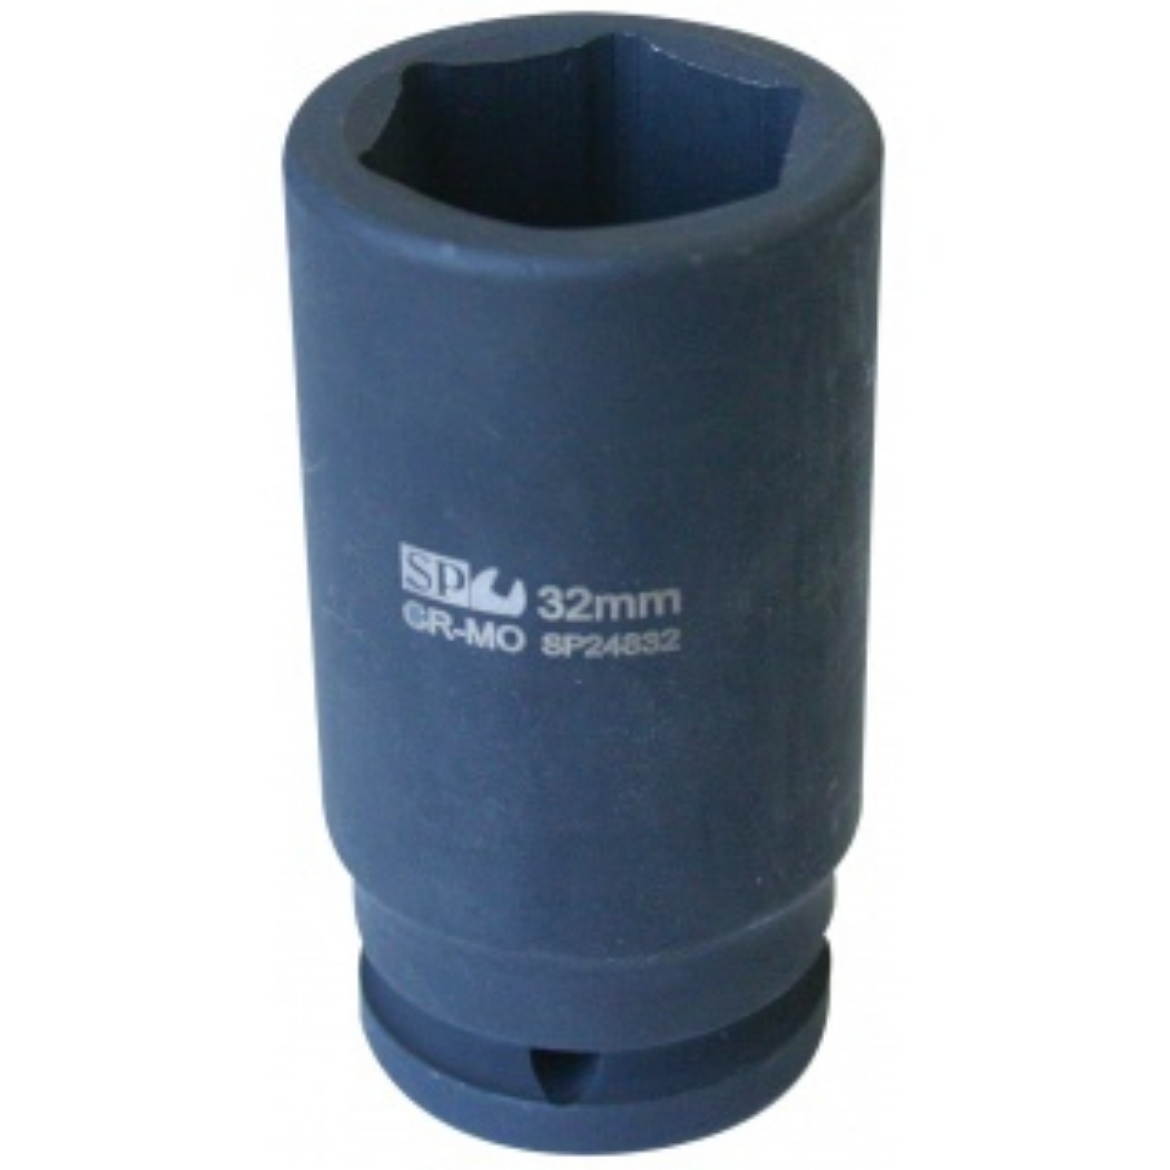 Picture of SOCKET IMPACT 3/4" DR 6PT DEEP METRIC 18MM SP TOOLS